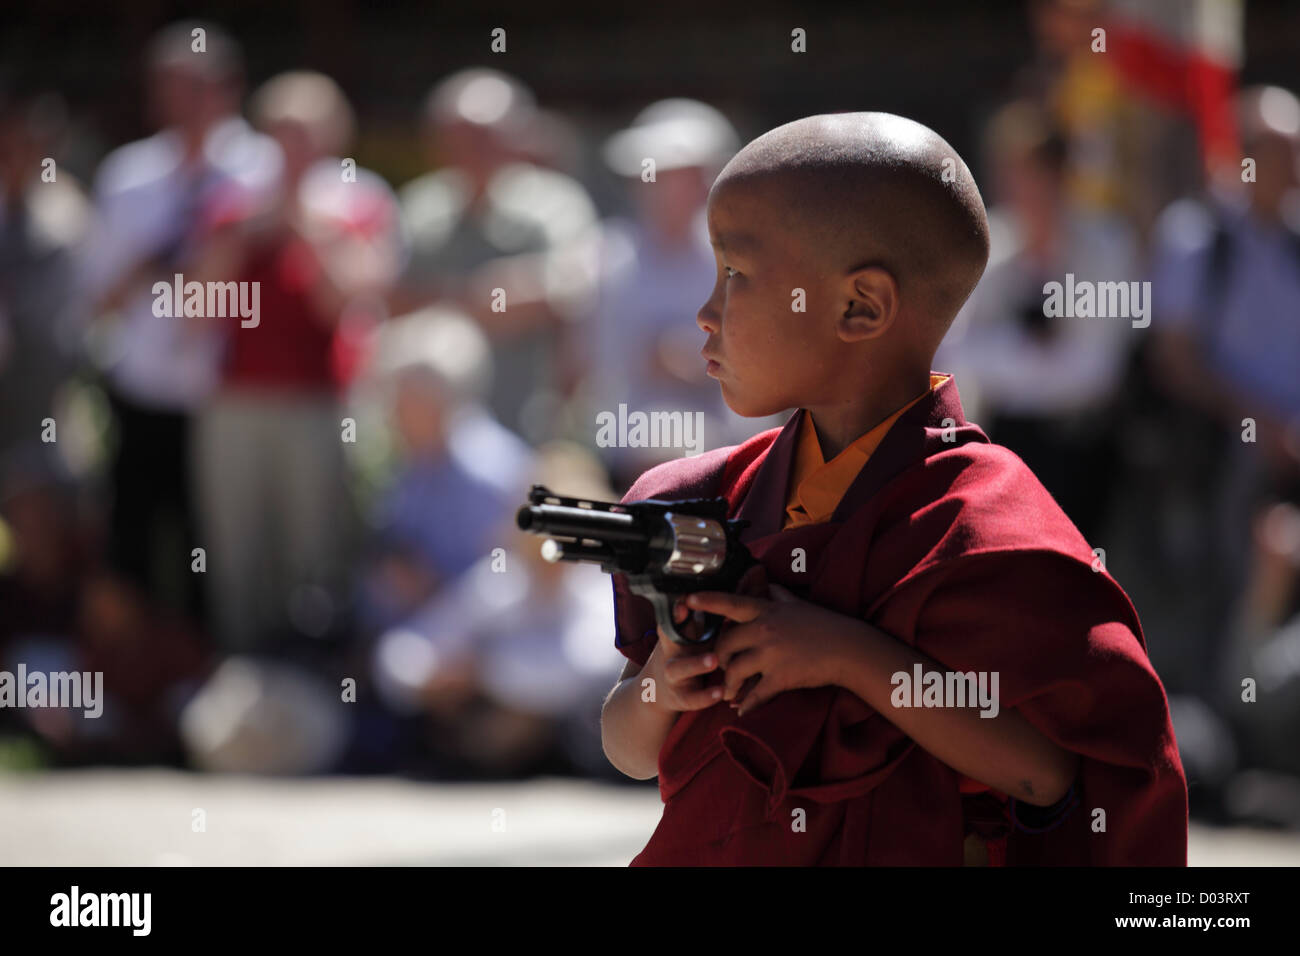 Little monk standing with a toy gun performing art at a festival in Bhutan Stock Photo